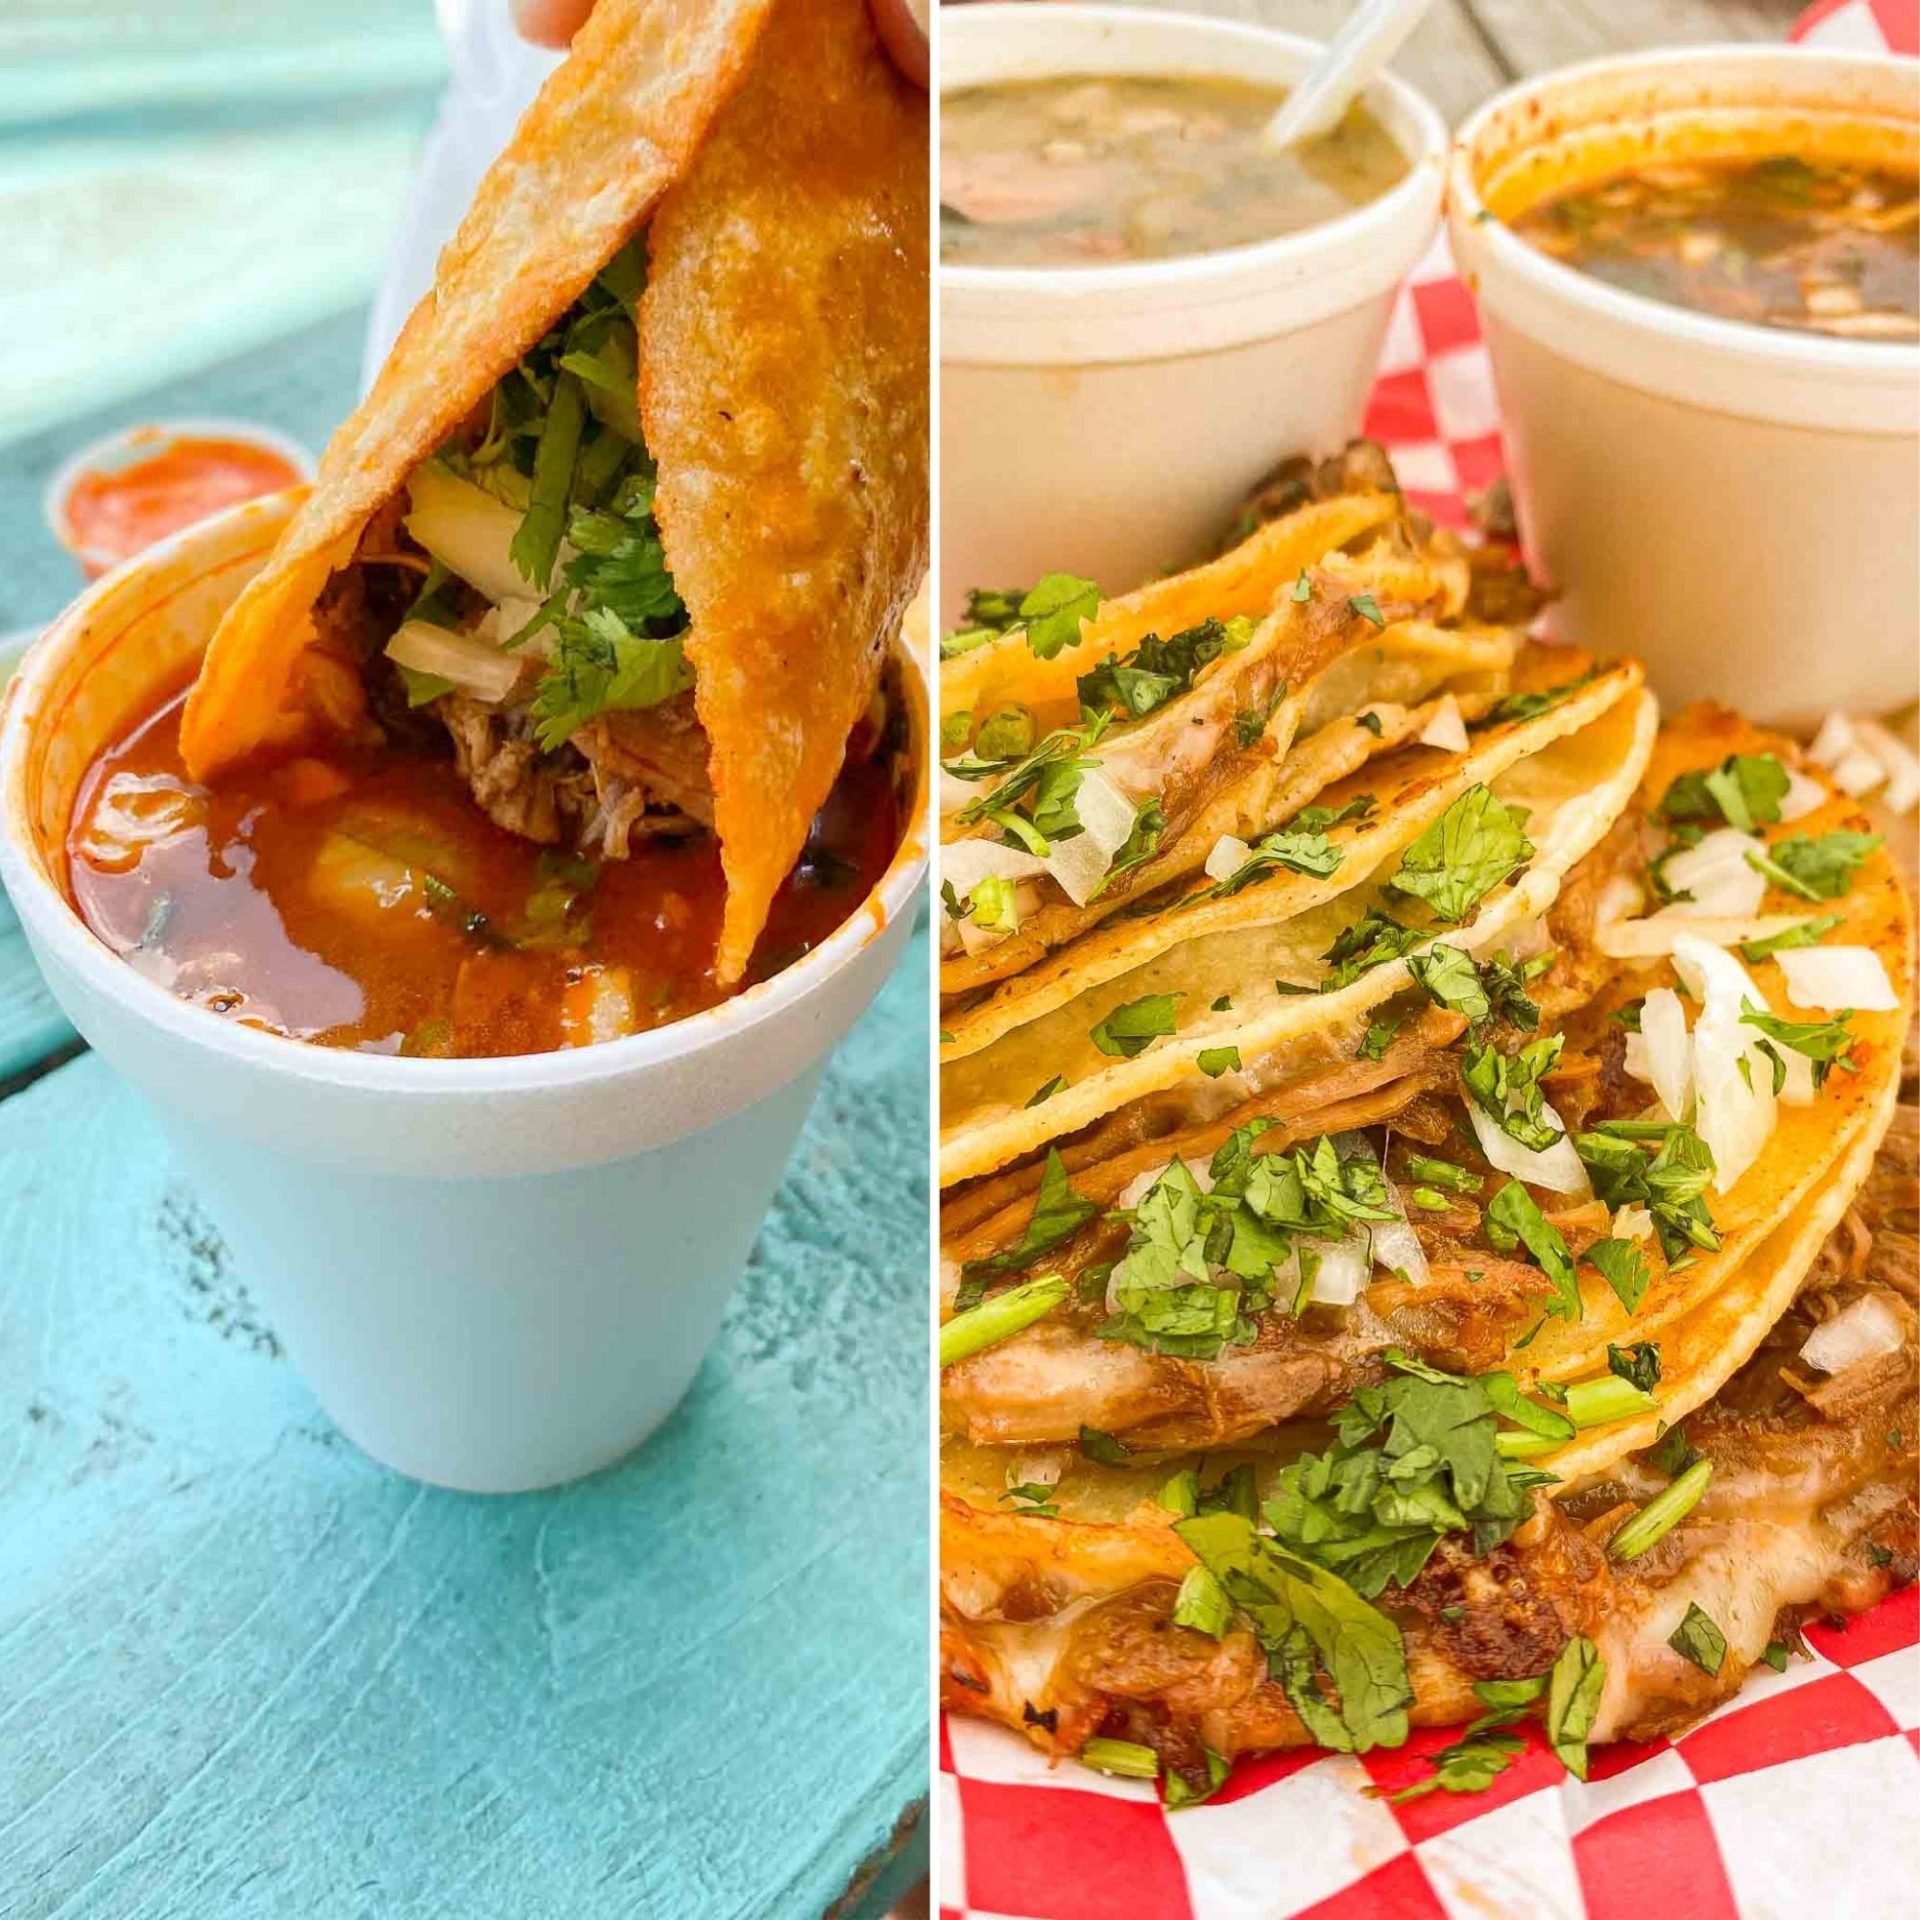 Where To Eat Birria Tacos In Austin - So Much Life